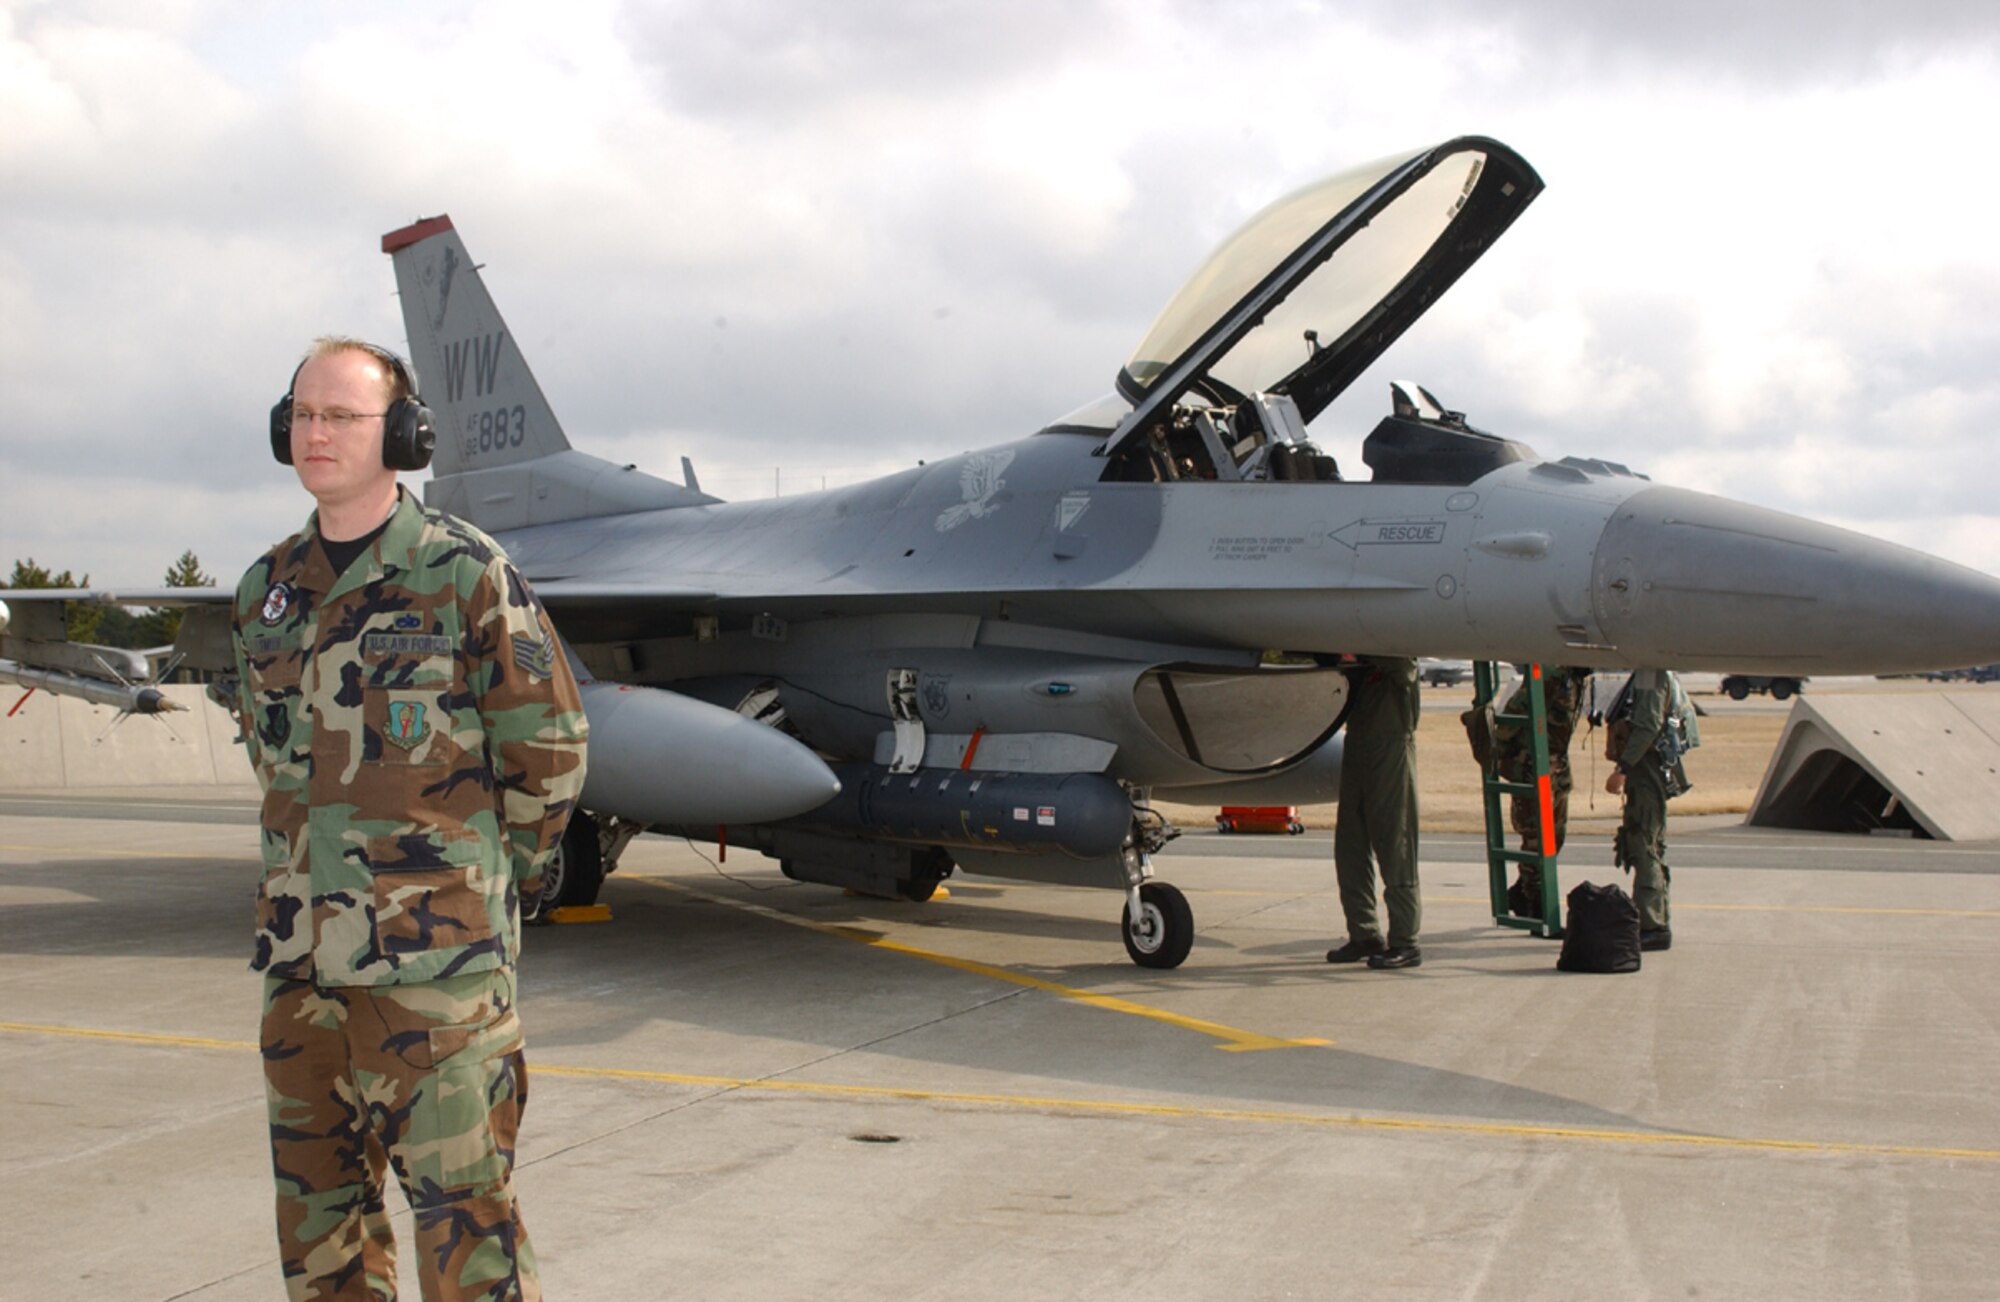 070413-MISAWA AIR BASE, Japan -- Staff Sgt. Christopher Smith, 35th Aircraft Maintenance Squadron, stands by while a 13th Fighter Squadron pilot does his pre-flight check on his F-16 Wild Weasel. (U.S. Air Force photo by Senior Airman Robert Barnett)